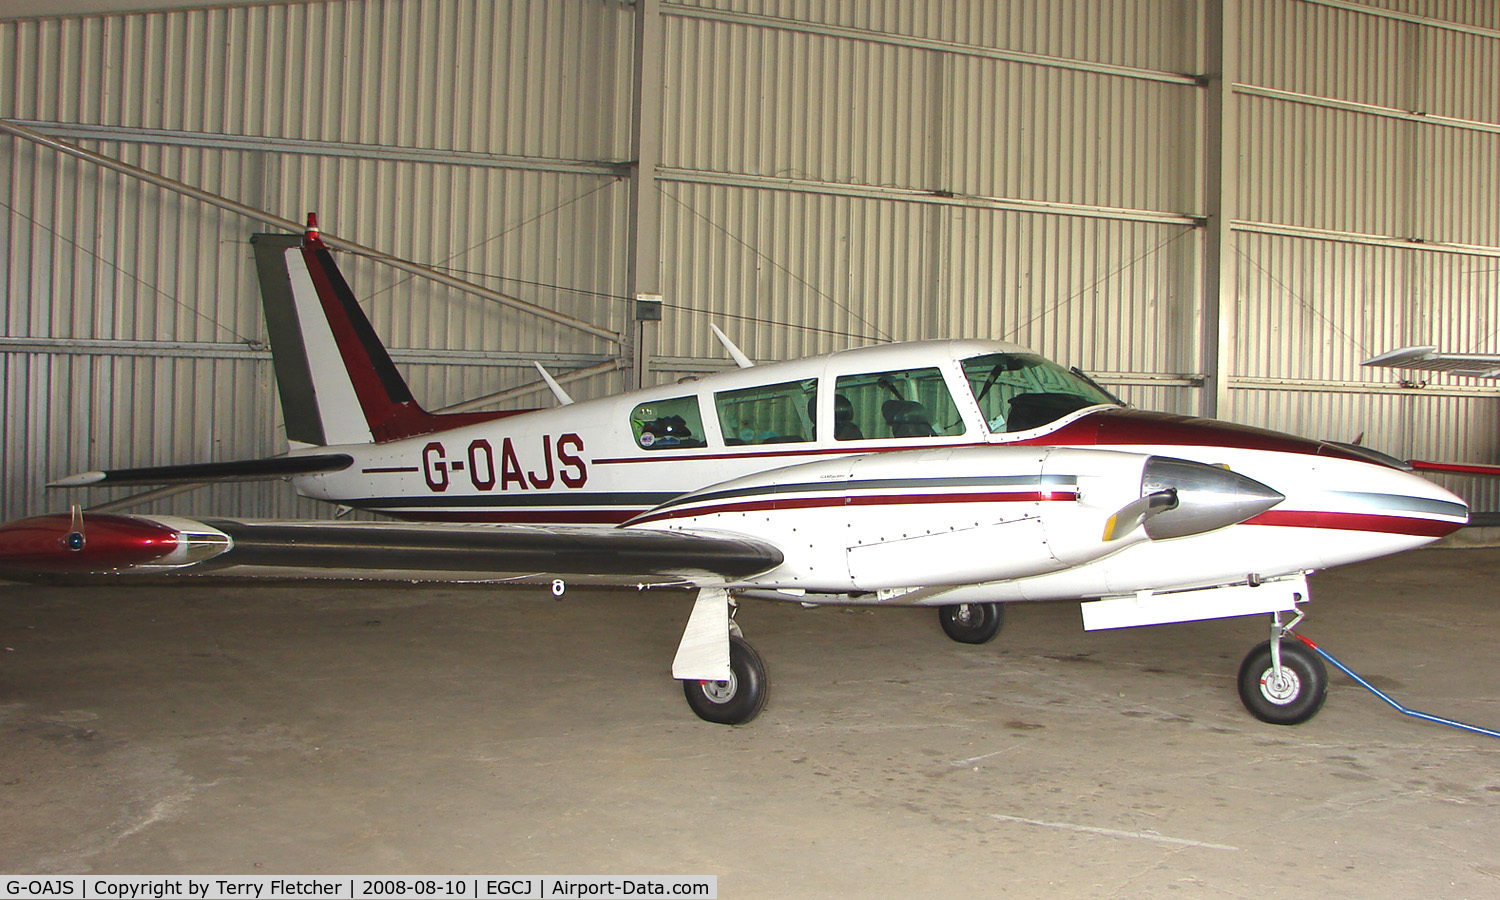 G-OAJS, 1970 Piper PA-39 Twin Comanche C/R C/N 39-15, Resident aircraft at Sherburn - seen during 2008 LAA Regional Fly in